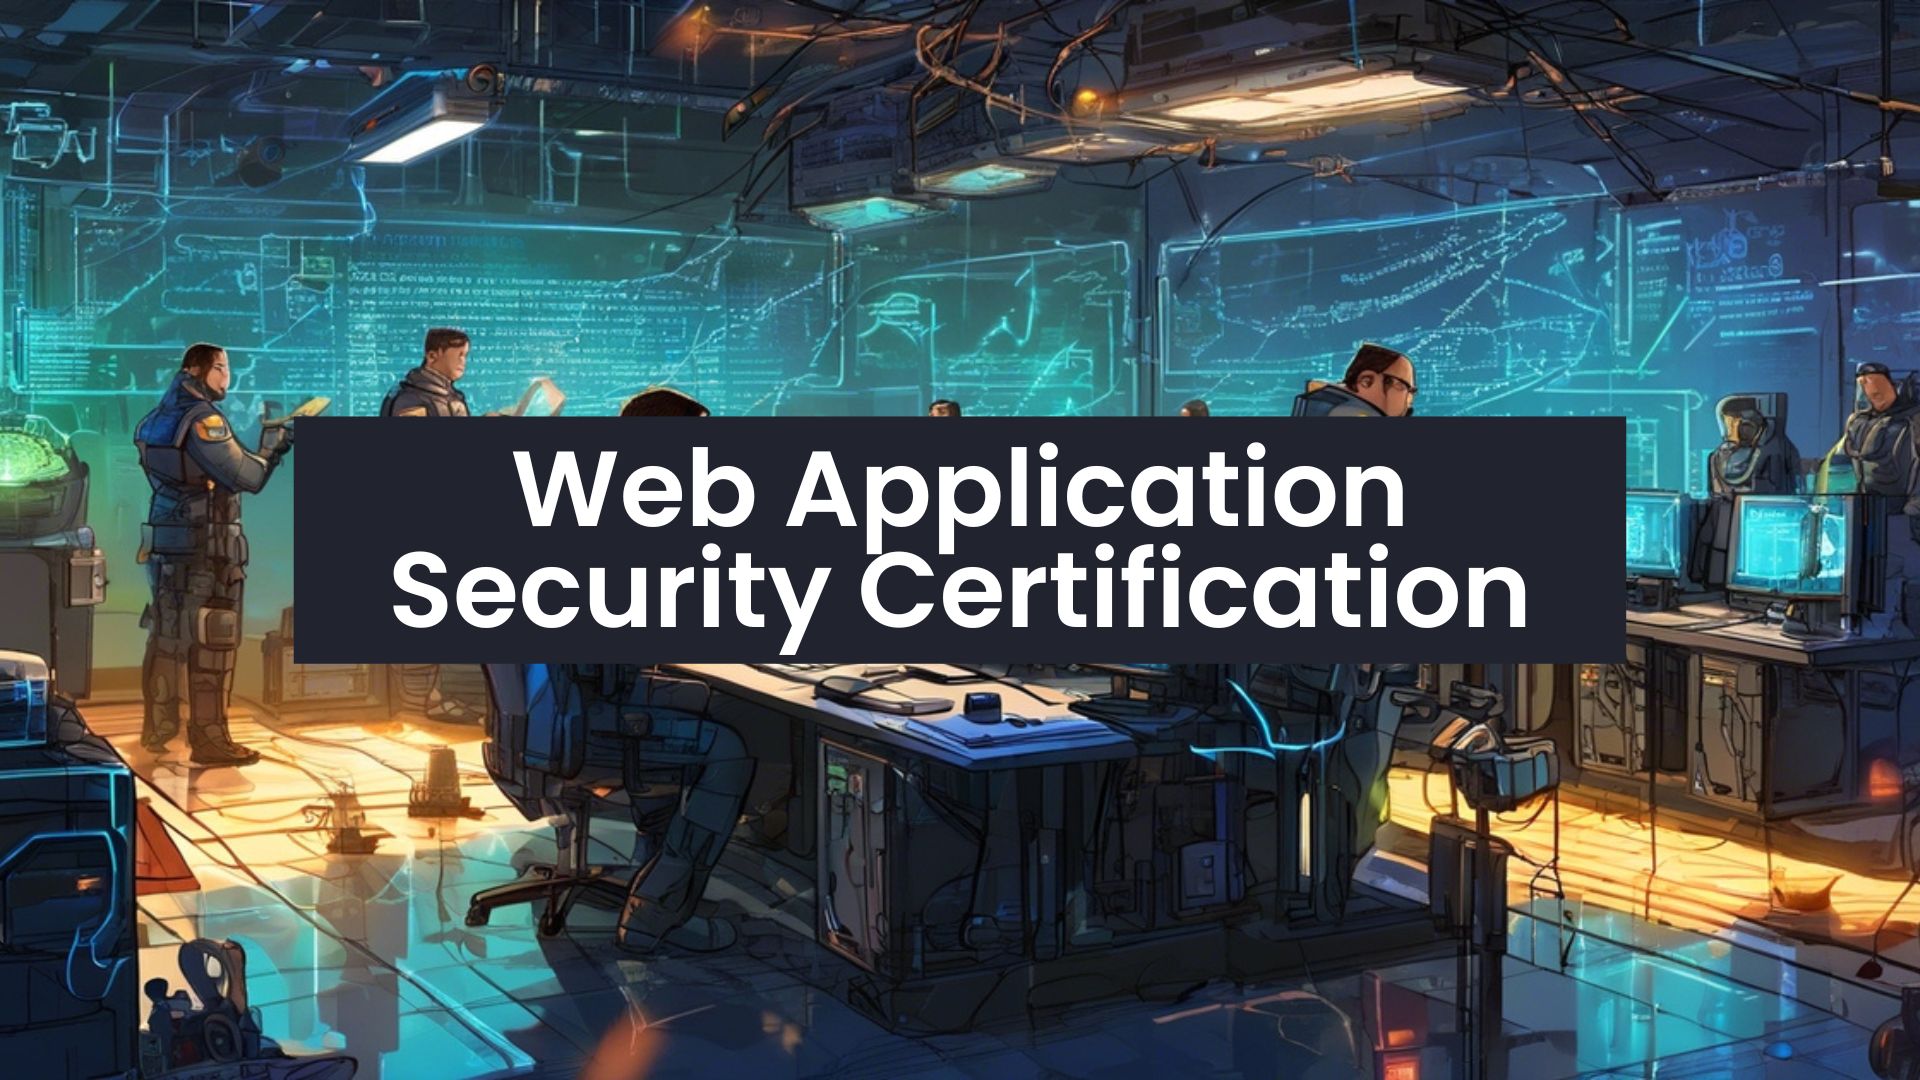 Web Application Security Certification